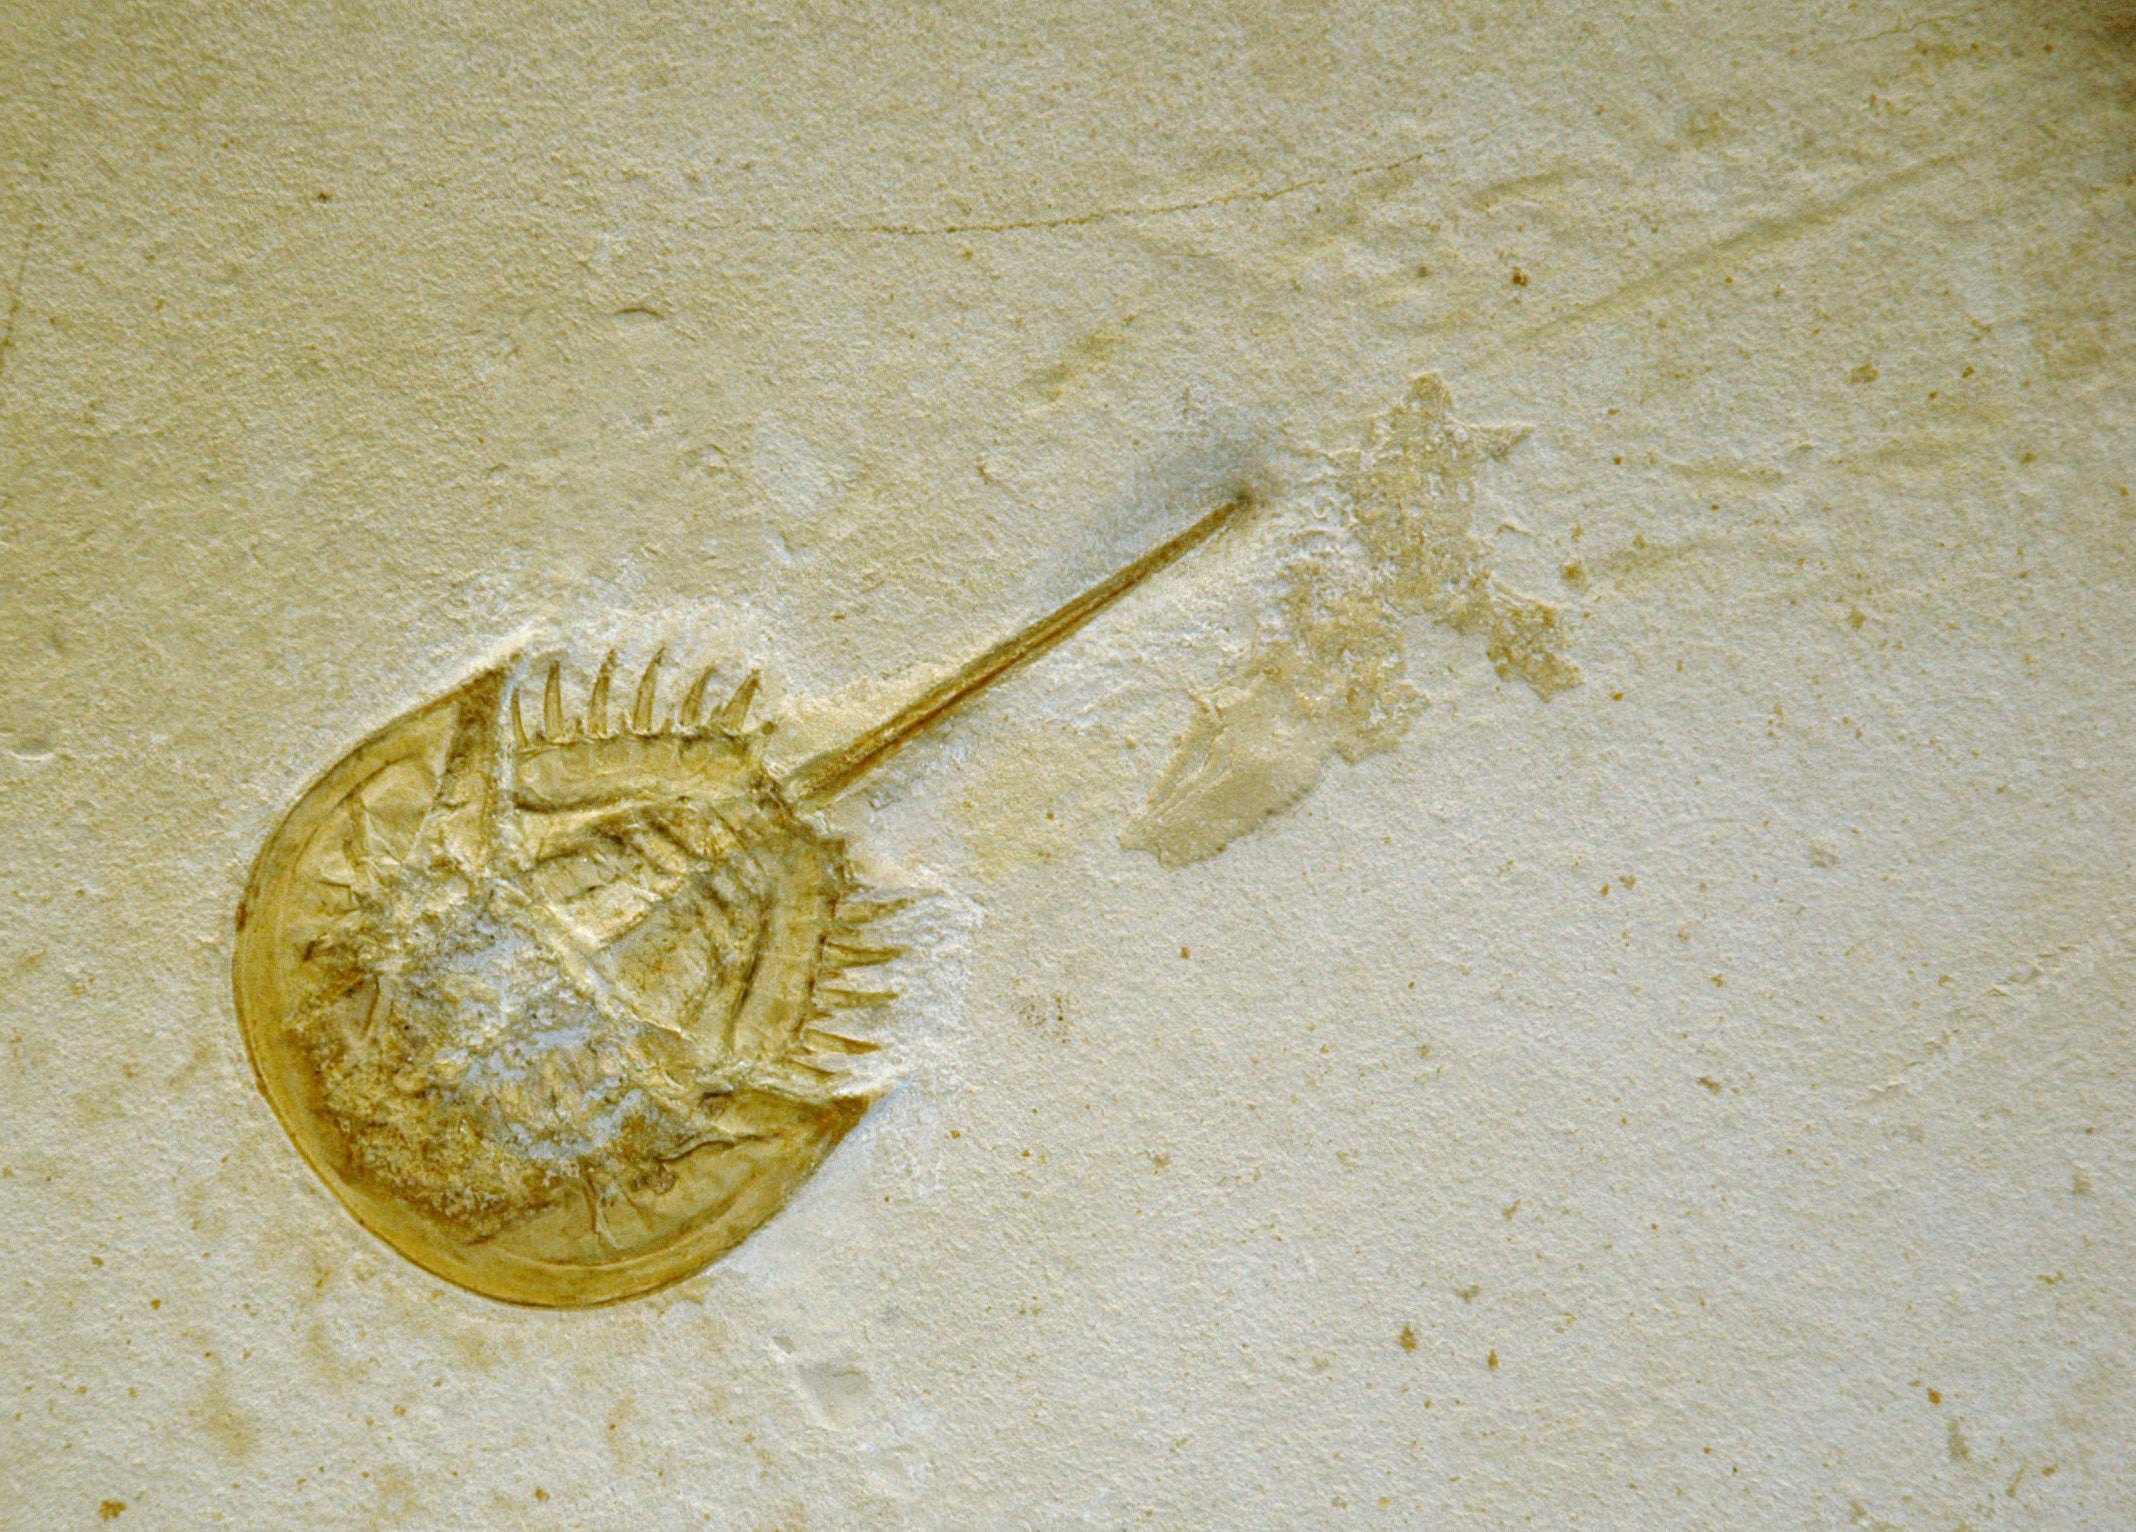 The horseshoe crab fossil (Image: Courtesy of Dean Lomax and the Wyoming Dinosaur Centre. Reproduced with permission from ‘Locked in Time’.)